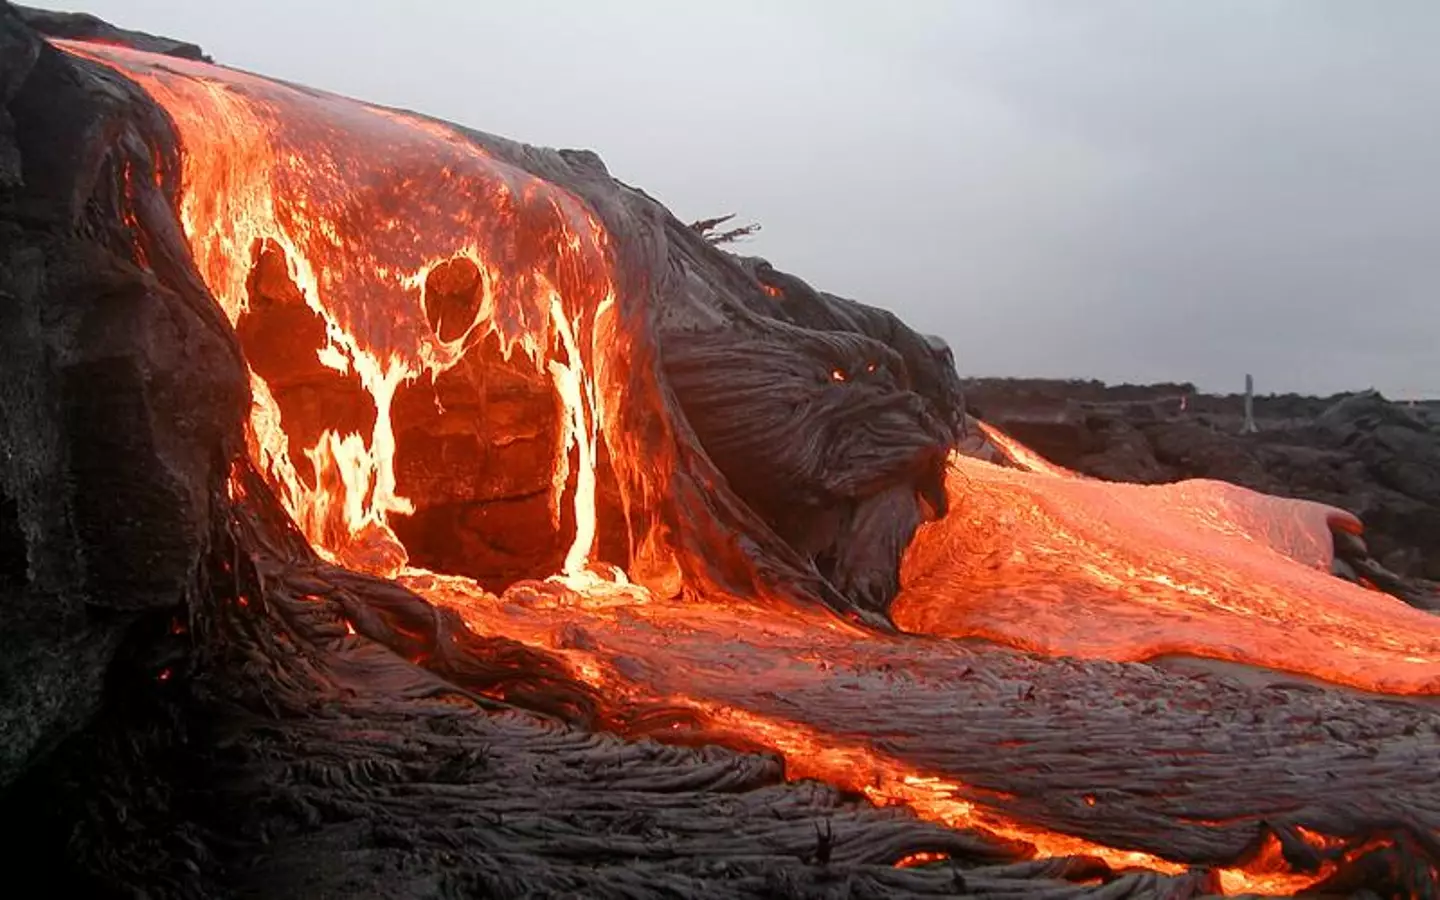 The lava findings could prove that the Earth's core is leaking.